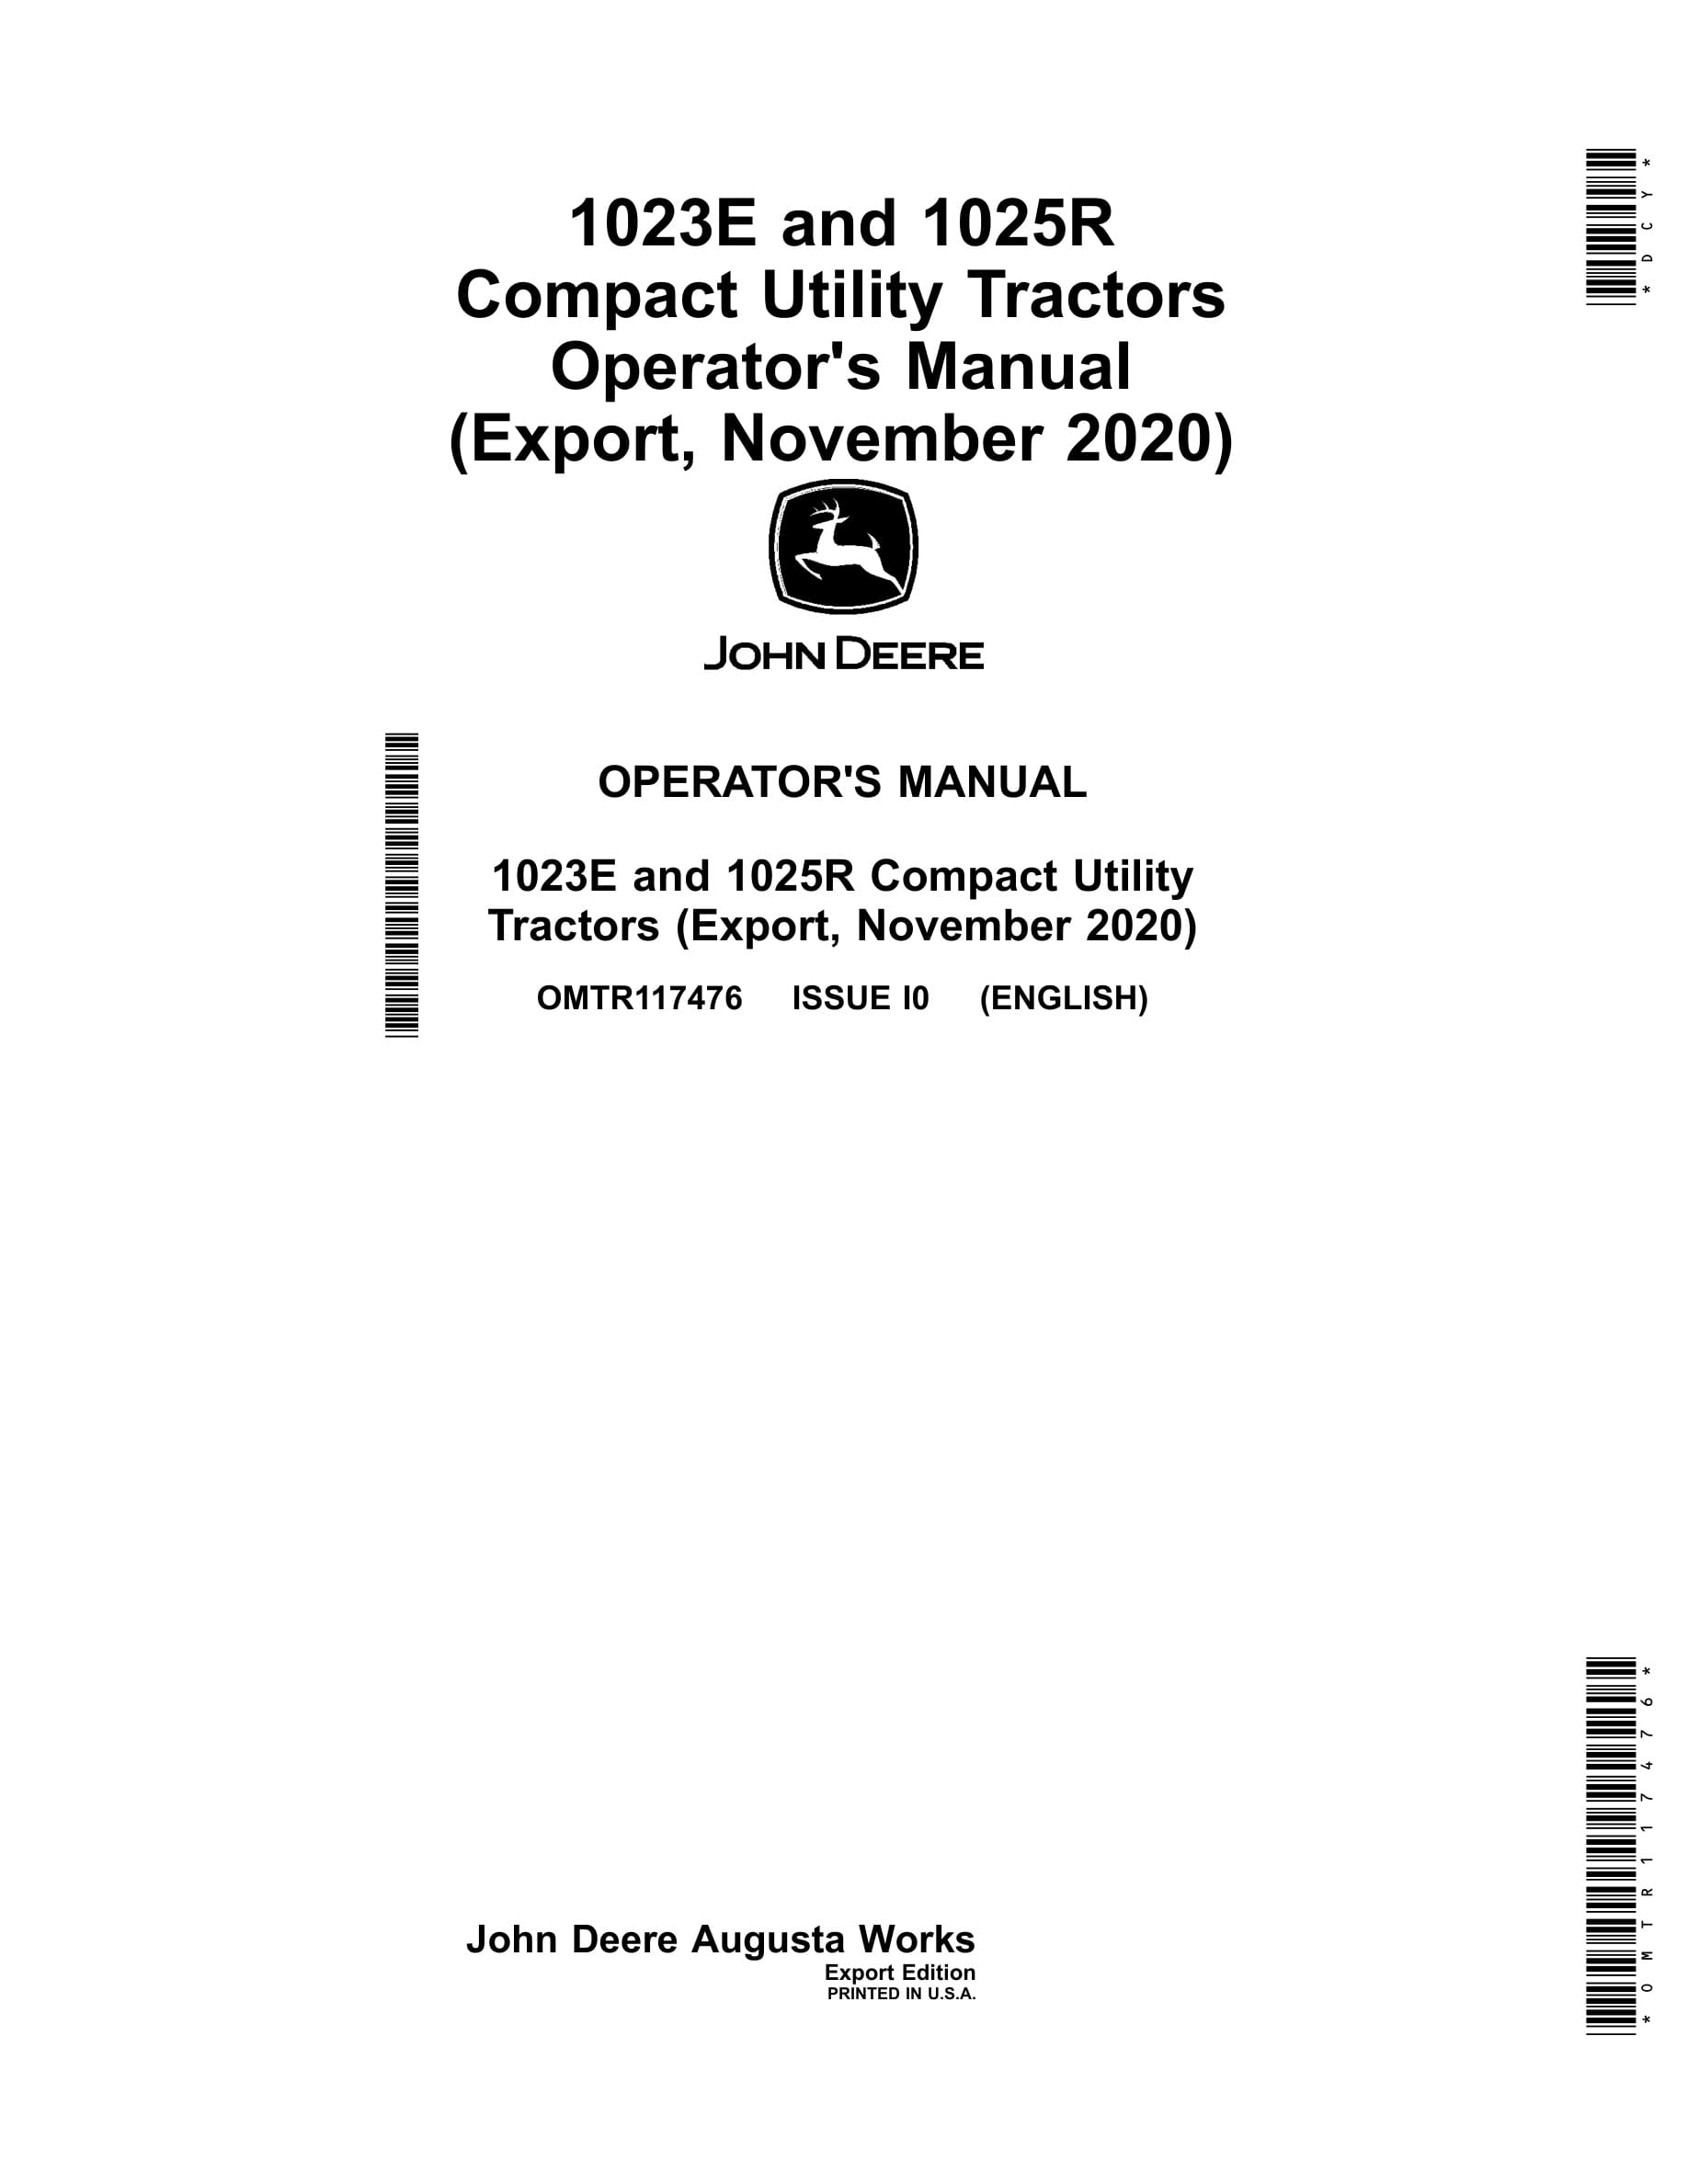 John Deere 1023e And 1025r Compact Utility Tractors Operator Manuals OMTR117476-1